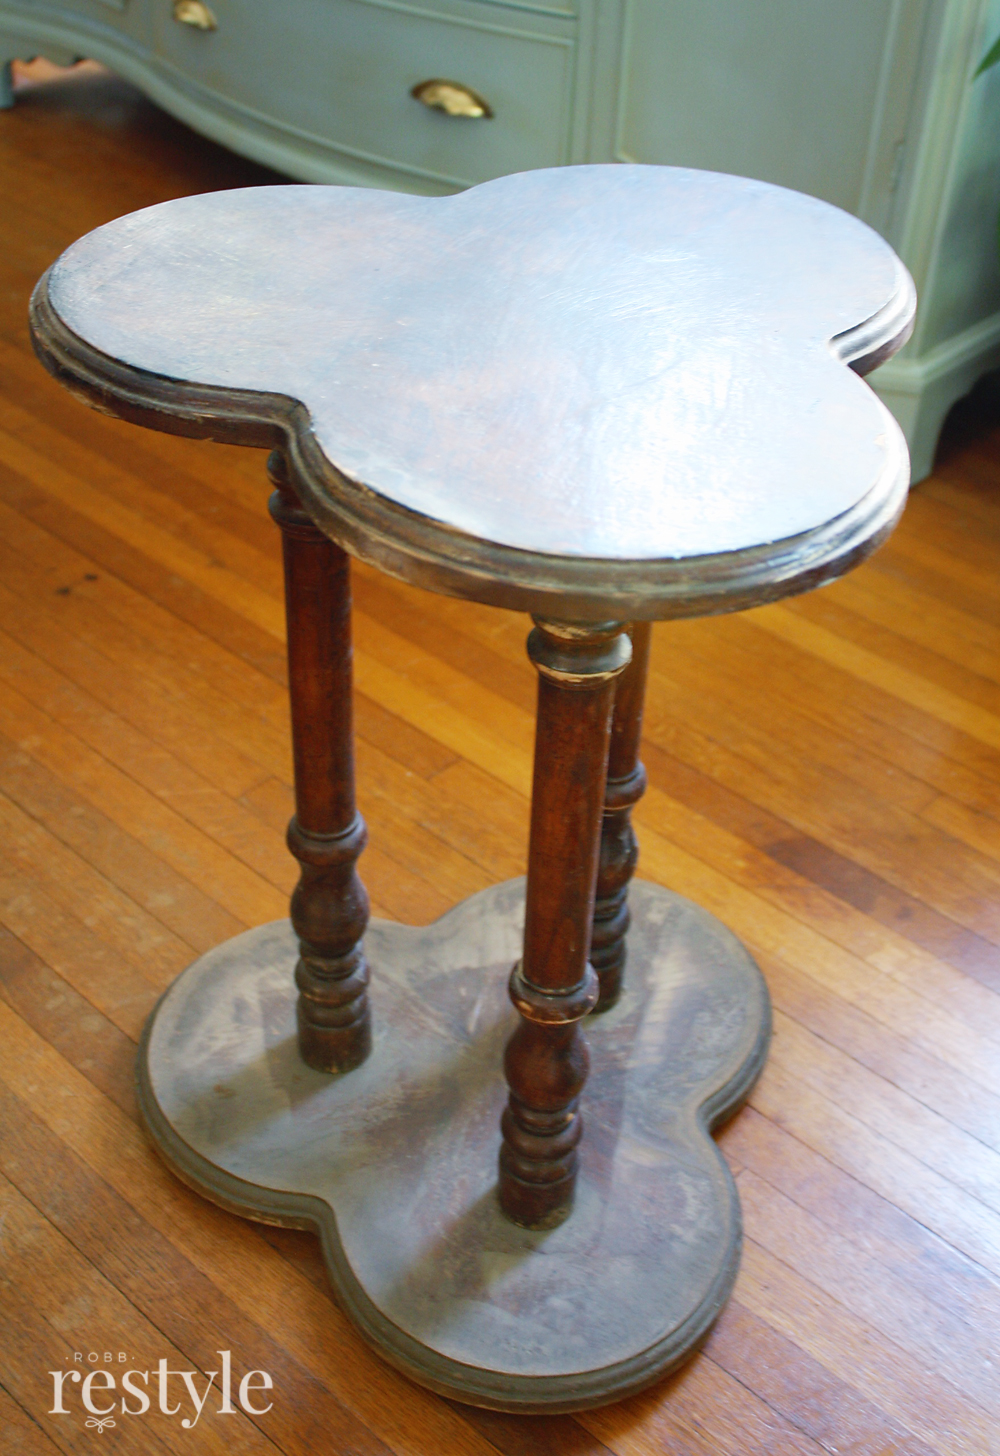 clover leaf table before